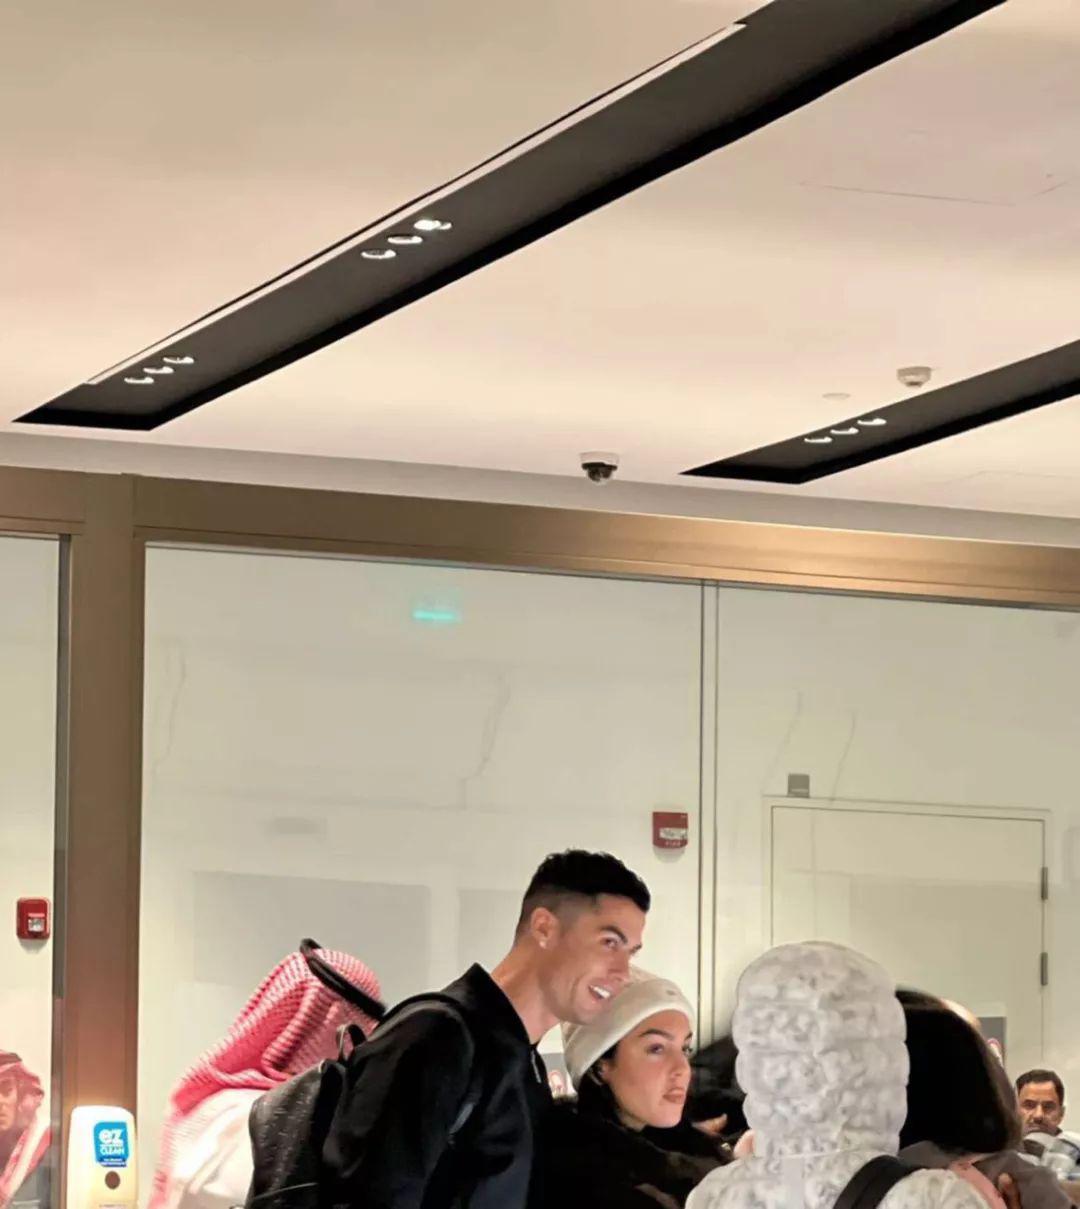 Cristiano Ronaldo and Georgina Rodríguez arrived together in Saudi Arabia, where CR7 will now play with Al Nassr.